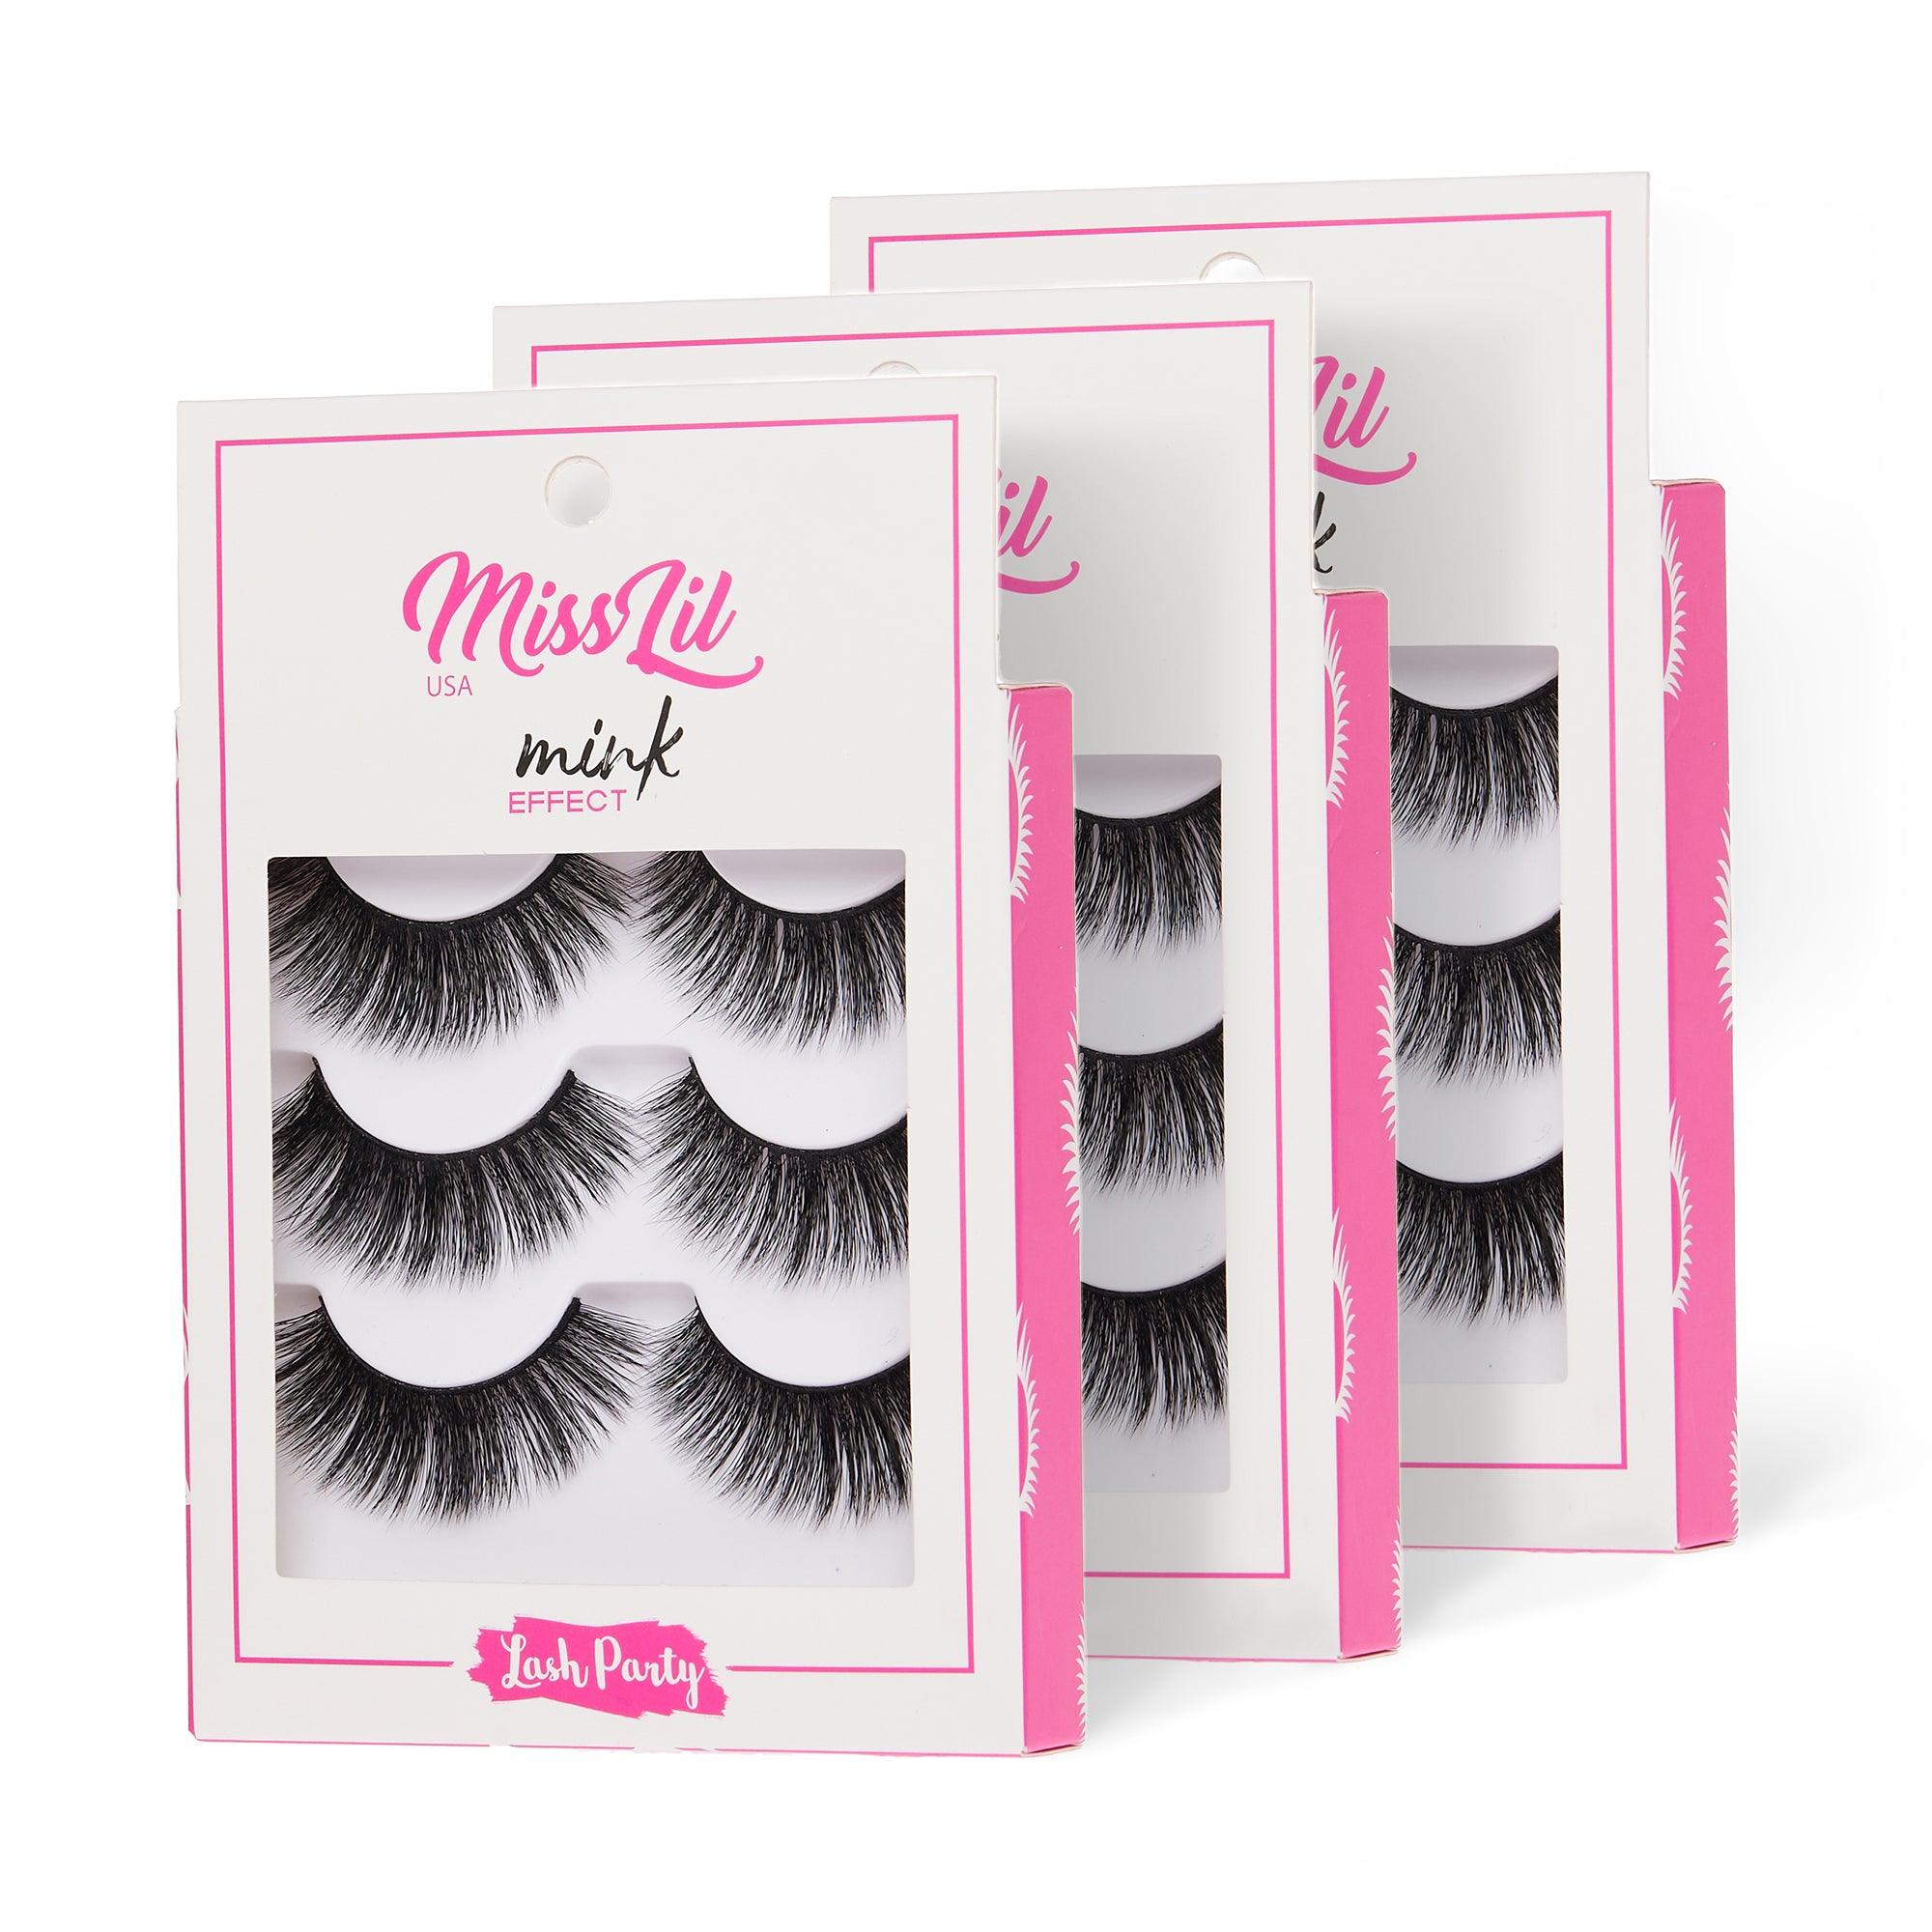 3-Pair Faux Mink Effect Eyelashes - Lash Party Collection #11 - Pack of 3 - Miss Lil USA